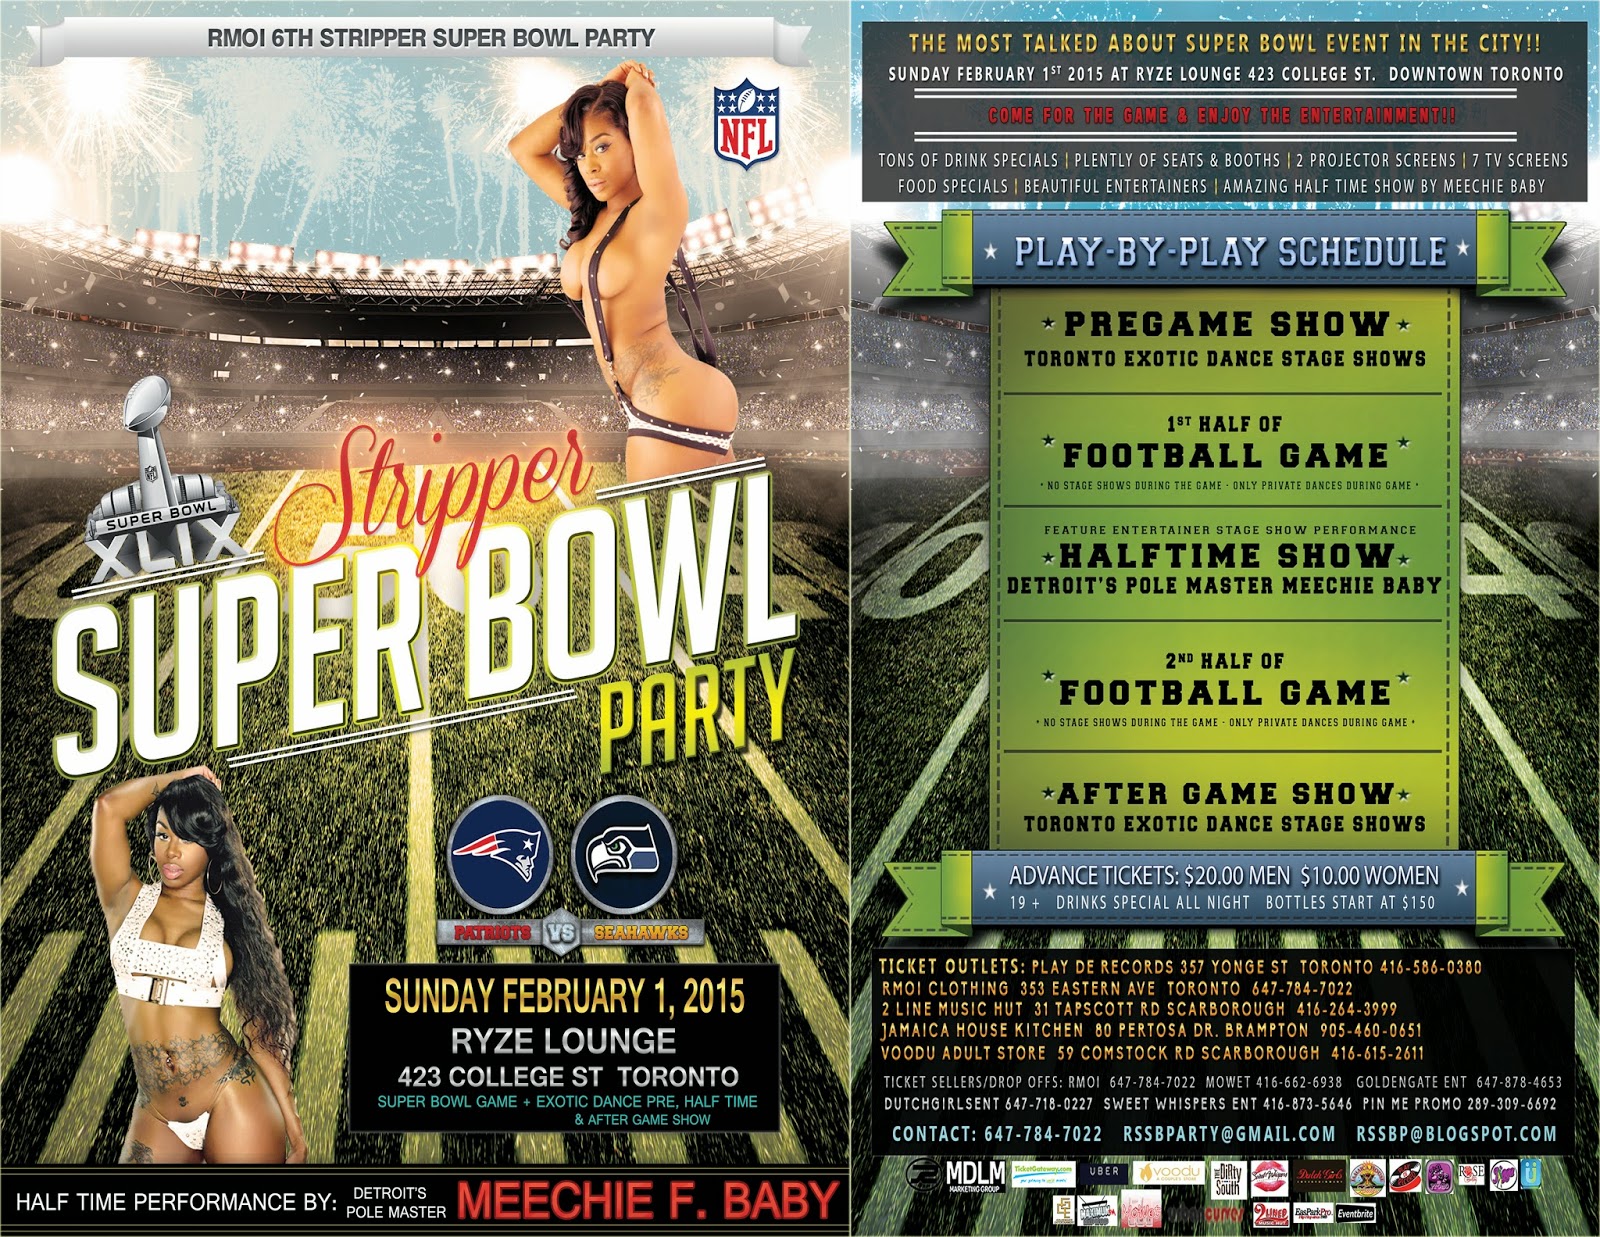 Football Frenzy: The NSFW Guide to Super Bowl Sunday